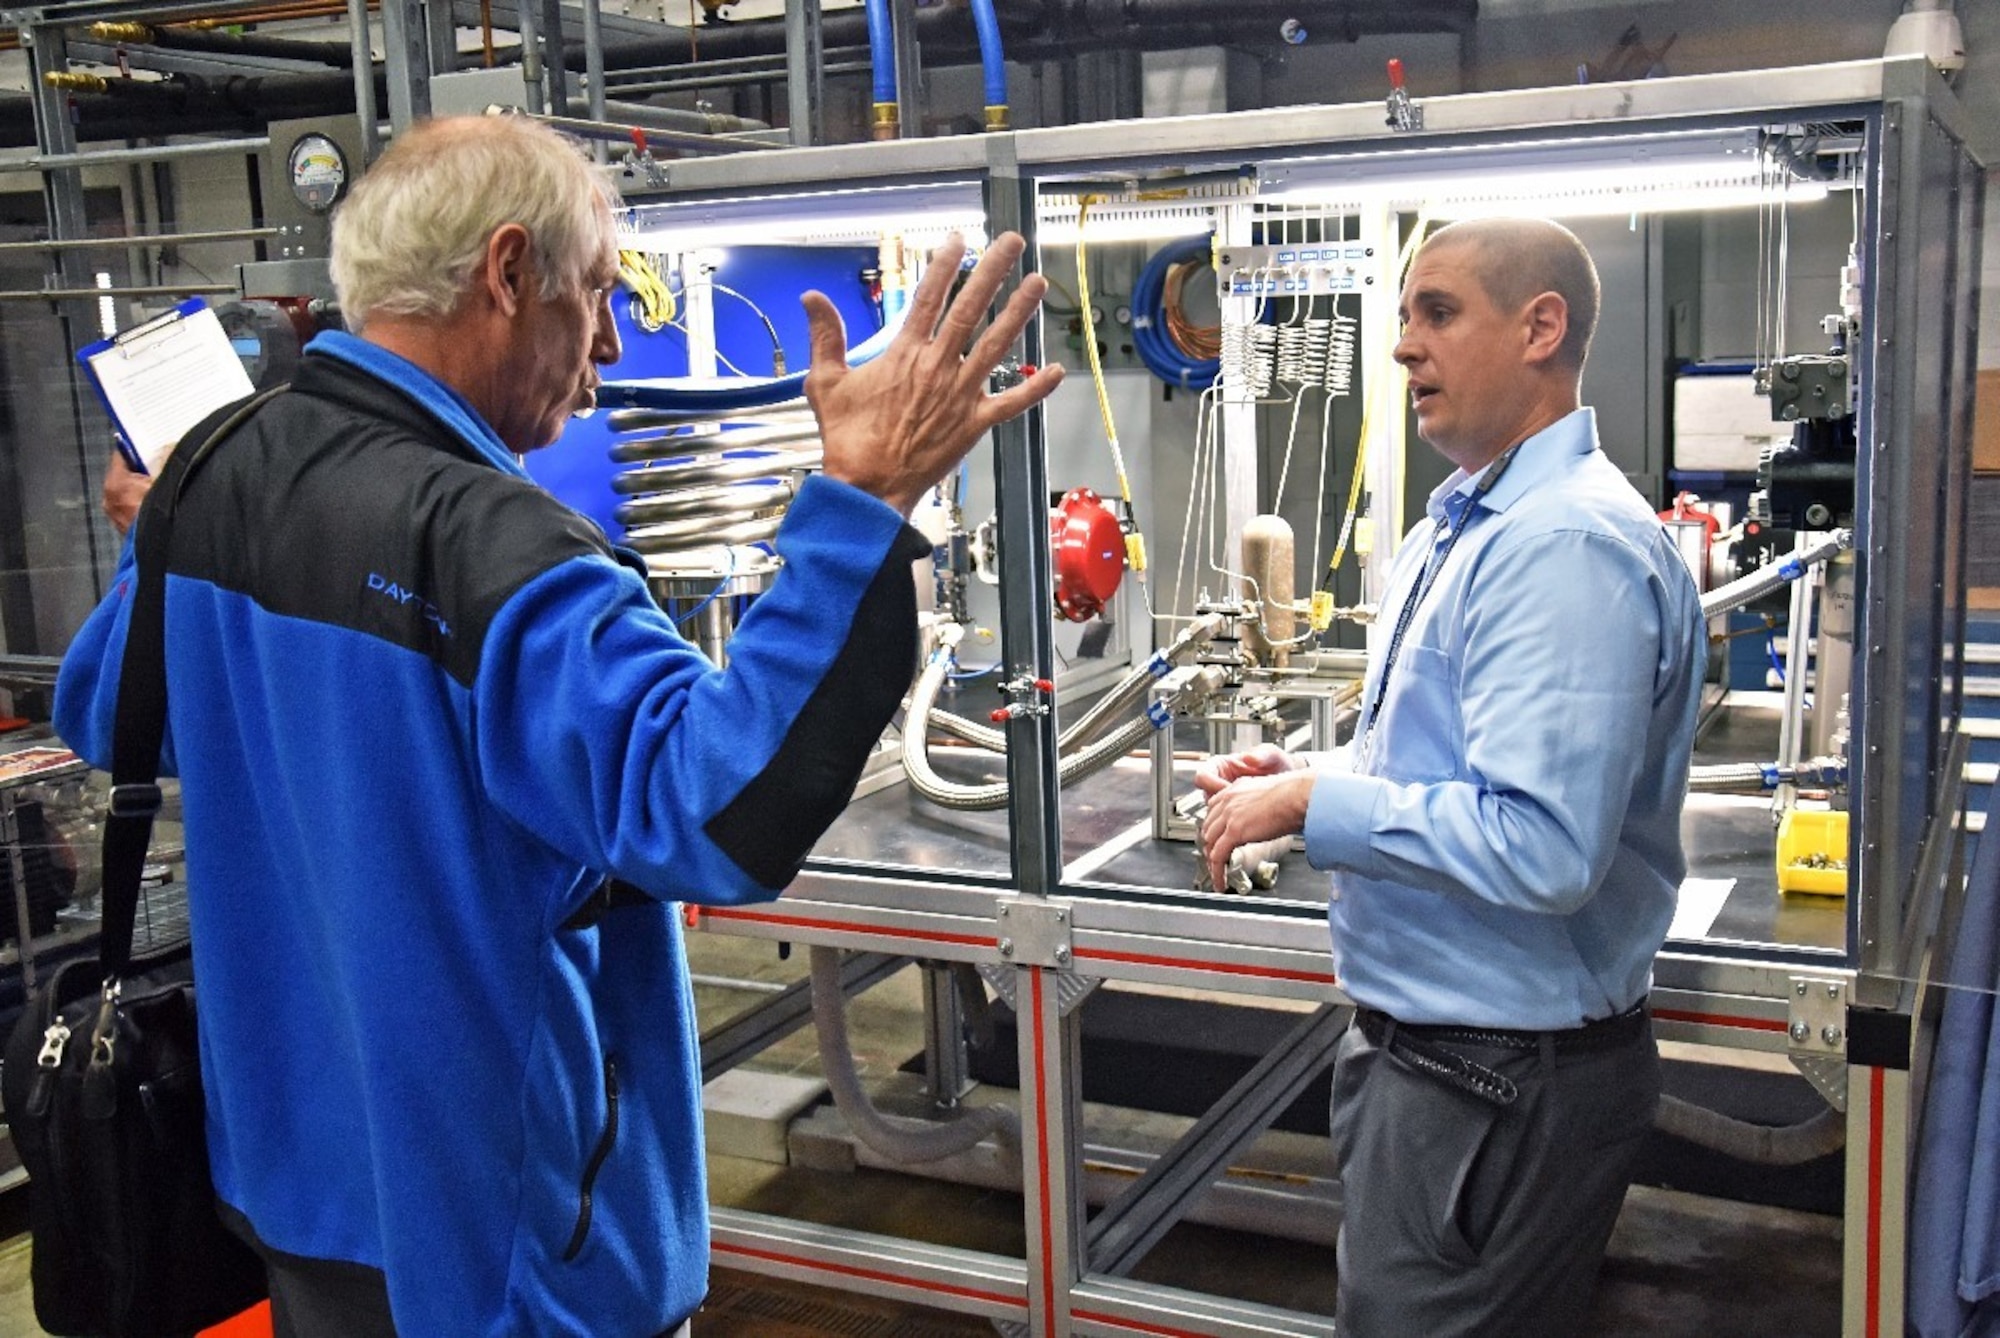 Marvin Gale, MAMLS Program Manager (left) and Grady Marcum, AFRL chemical engineer, discuss the new heat exchange tester during the capability’s kick-off tour, held Nov. 6. (U.S. Air Force Photo/Spencer Deer)